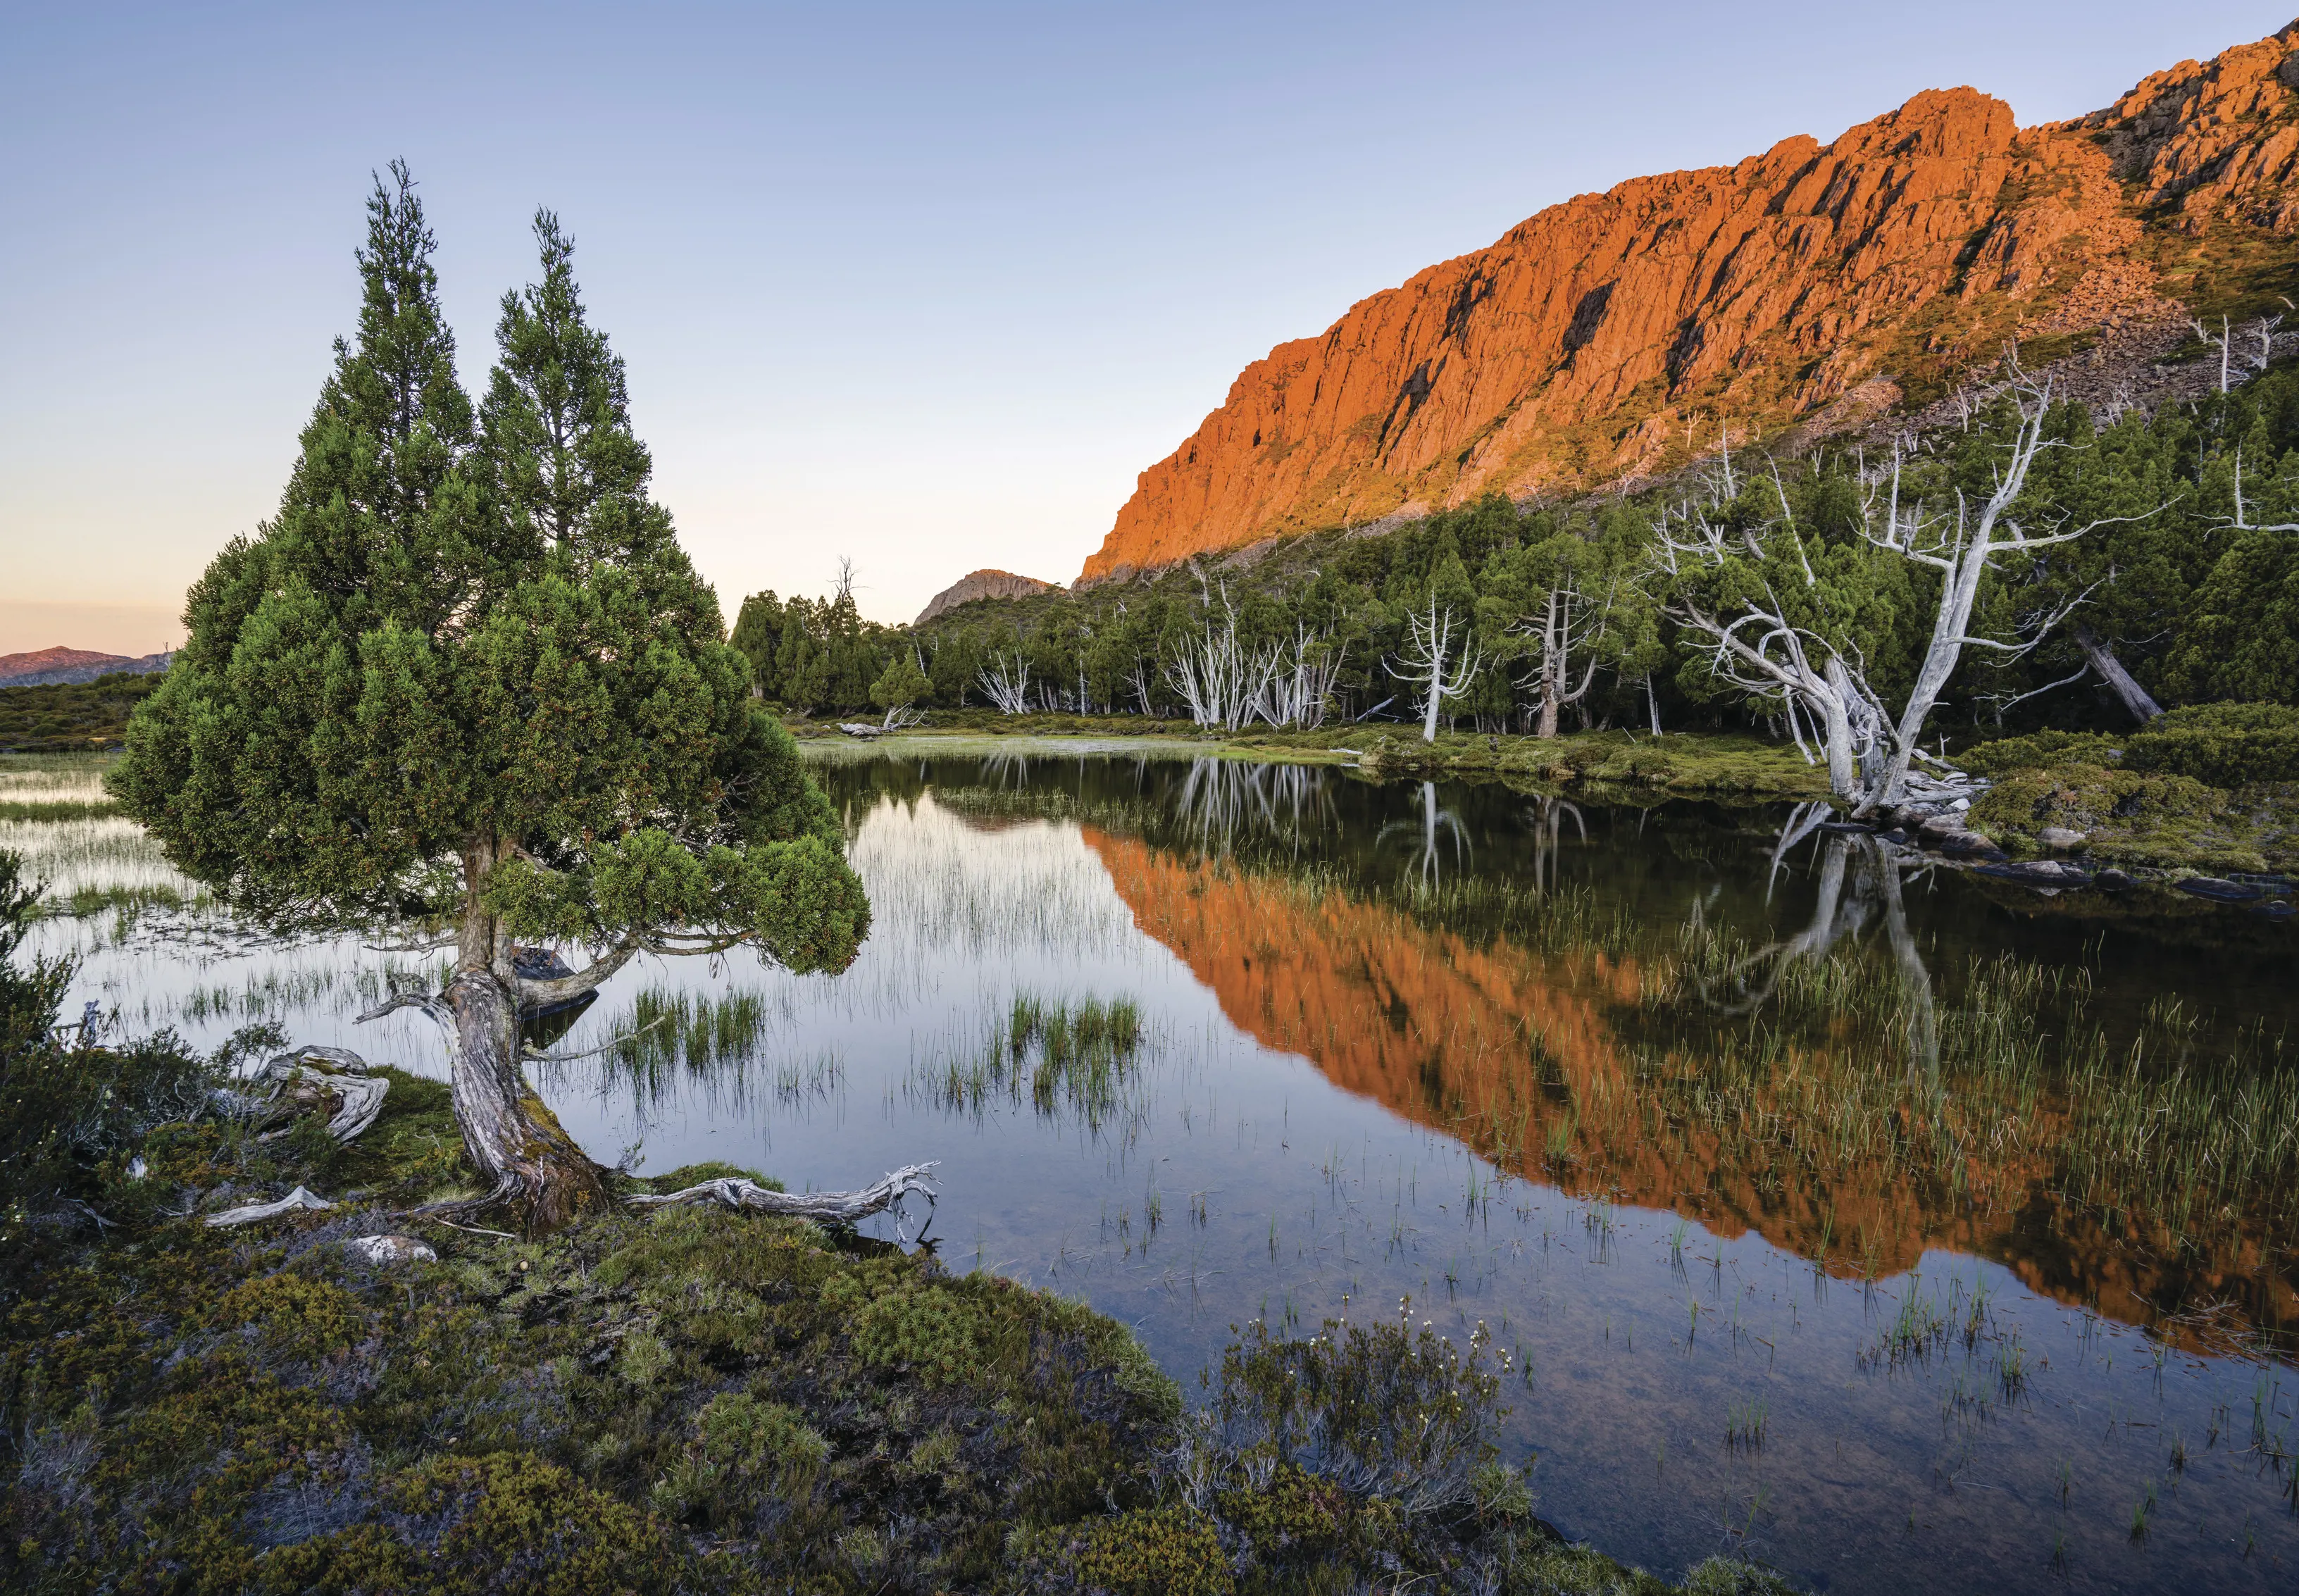 Dramatic and vibrant image of a creek and lush trees near the Walls of Jerusalem National Park, during sunrise.